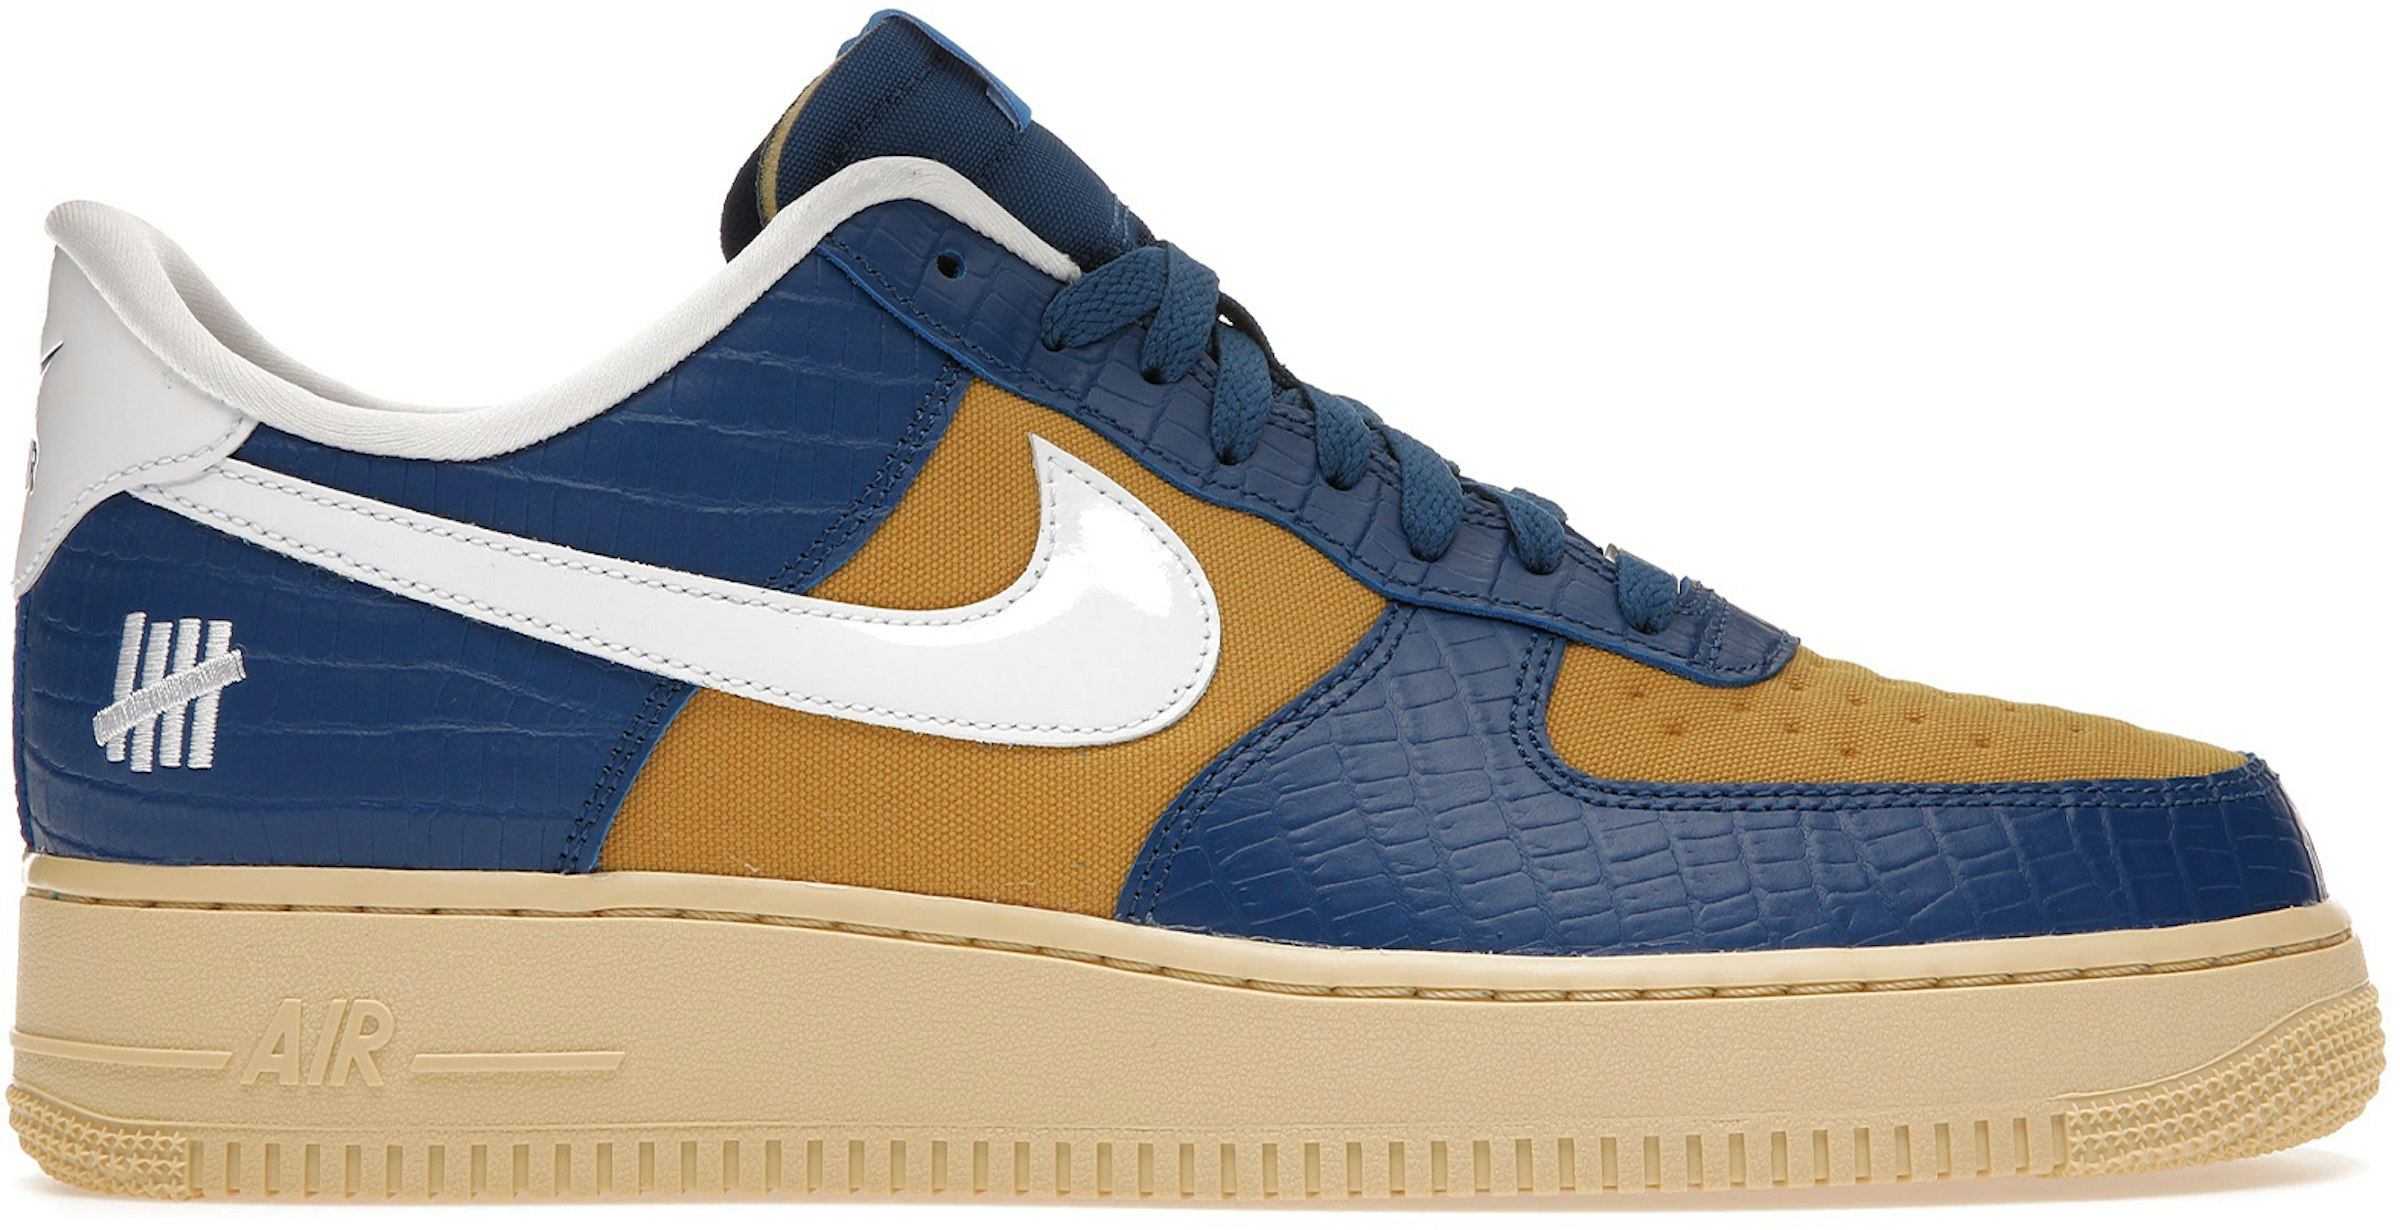 Naturaleza Preludio Compadecerse Nike Air Force 1 Low SP Undefeated 5 On It Blue Yellow Croc Hombre -  DM8462-400 - ES